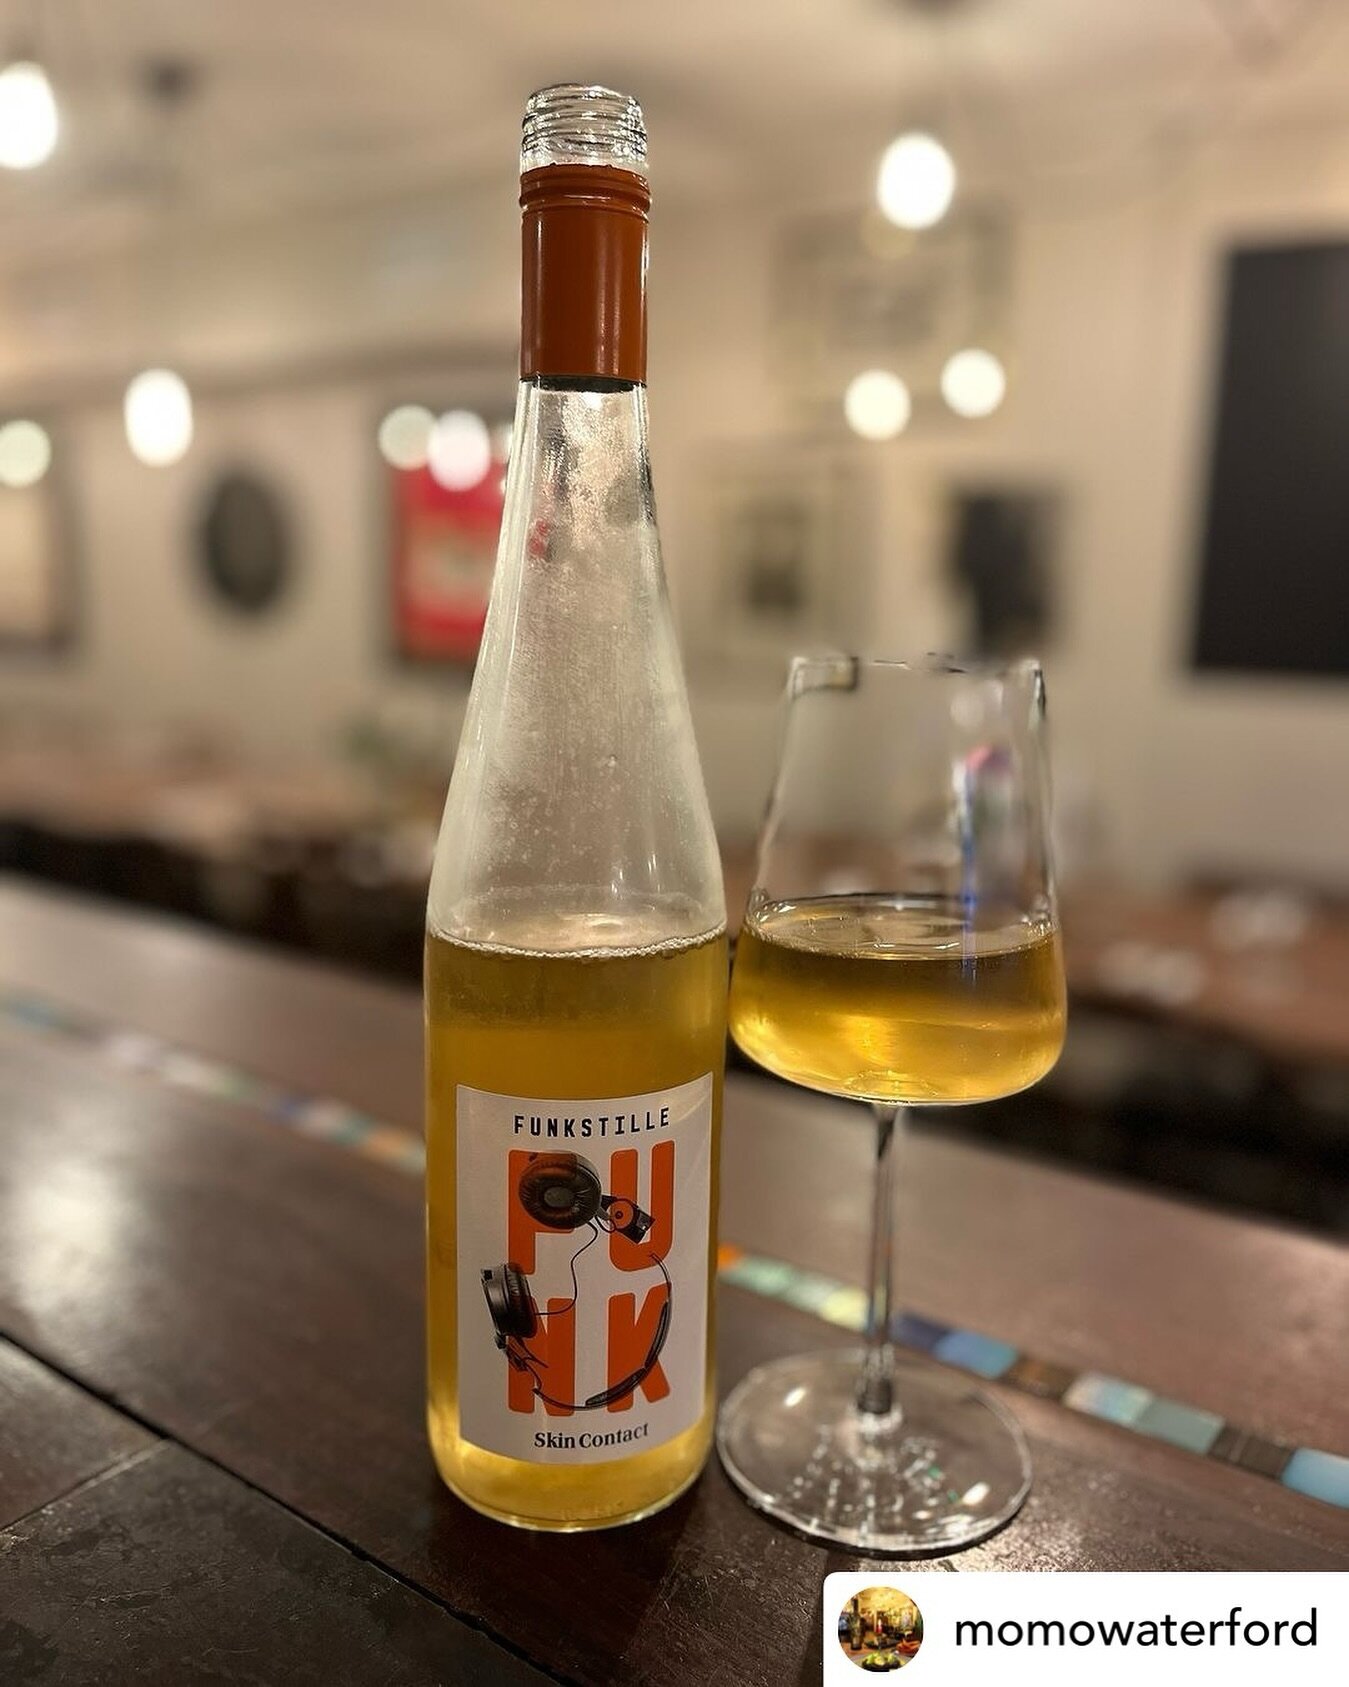 @momowaterford Funkstille (radio silence), skin contact wine from Austria is a delightful blend of Riesling, Gruner Veltliner, Gewurztraminer &amp; Muscat. Notes of ginger, white pepper and flowers with underlying hint of green tea and mandarin. Fabu